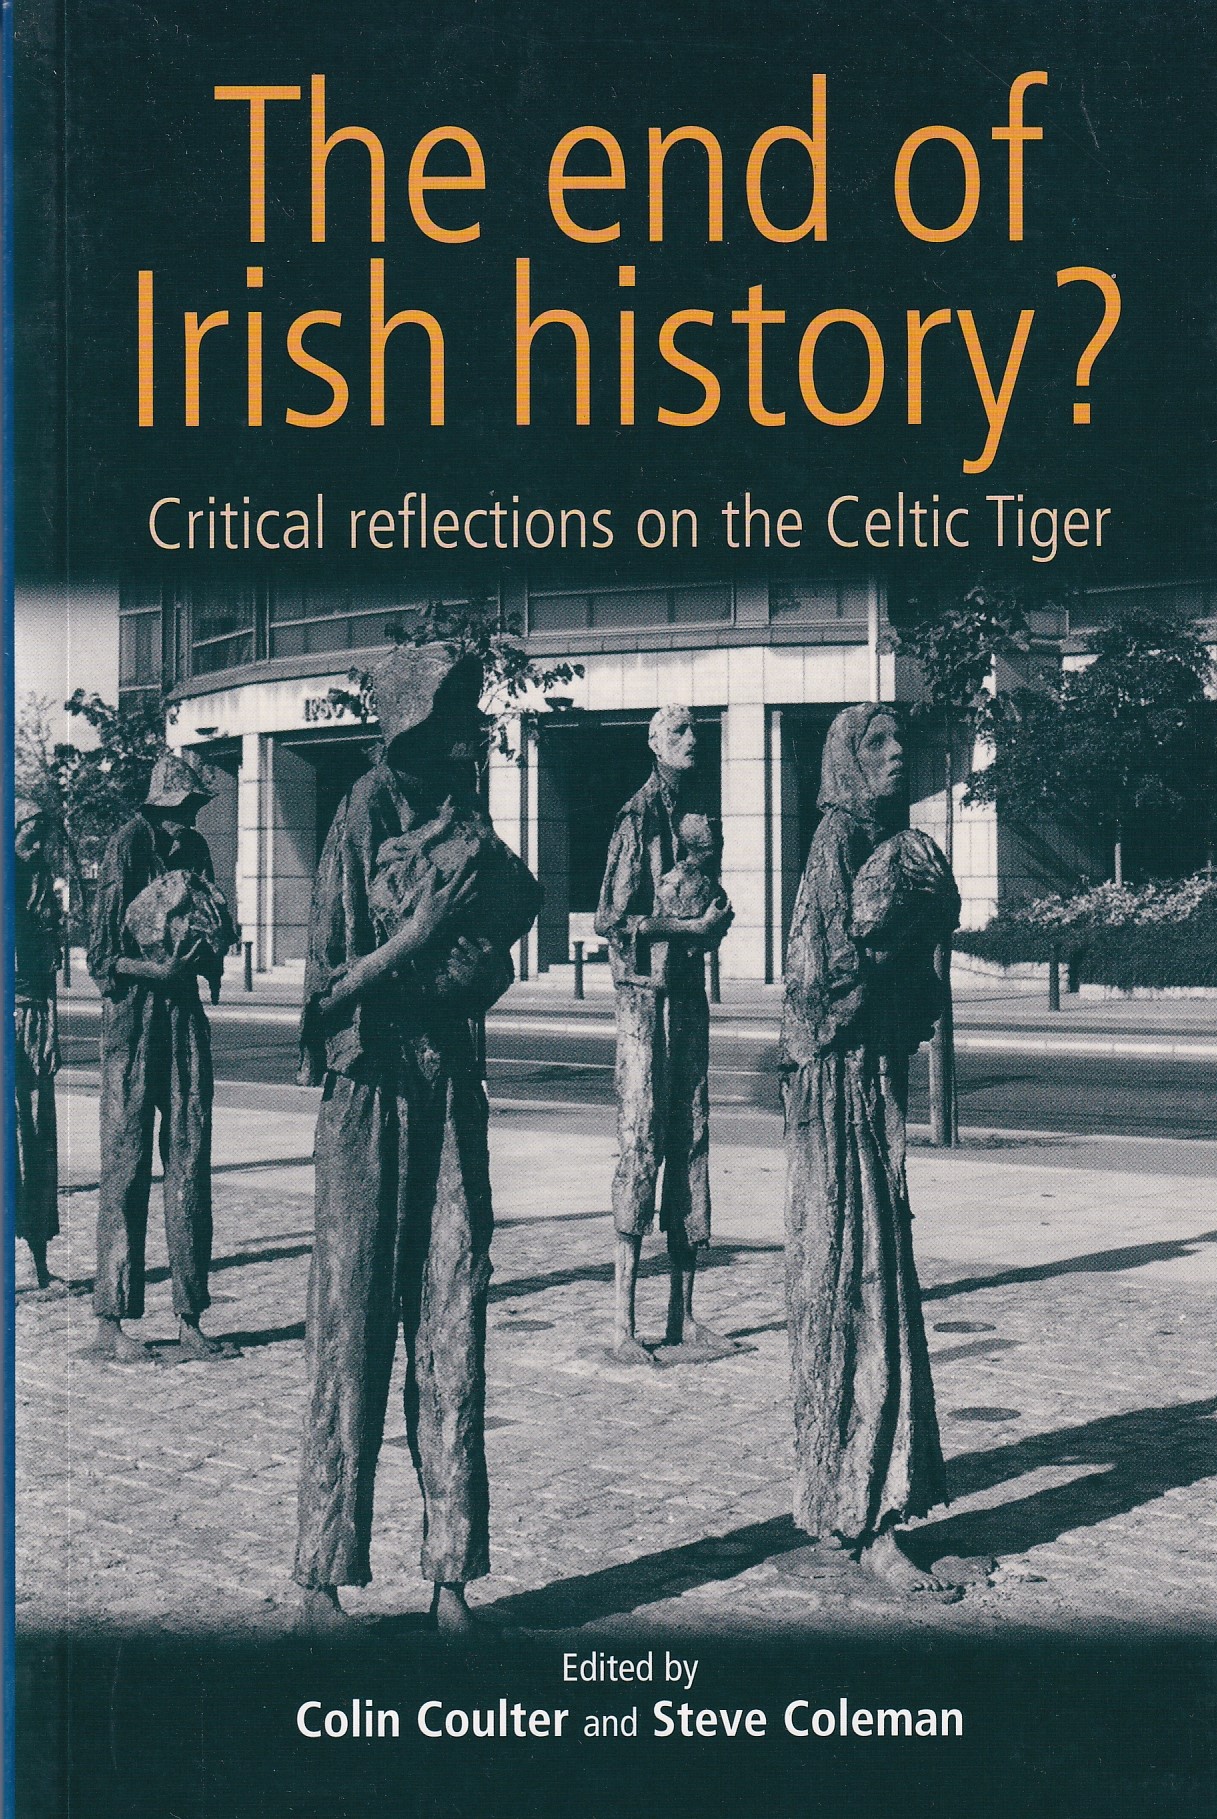 The end of Irish history?: Reflections on the Celtic Tiger by Coulter, Colin; Coleman, Steve eds.